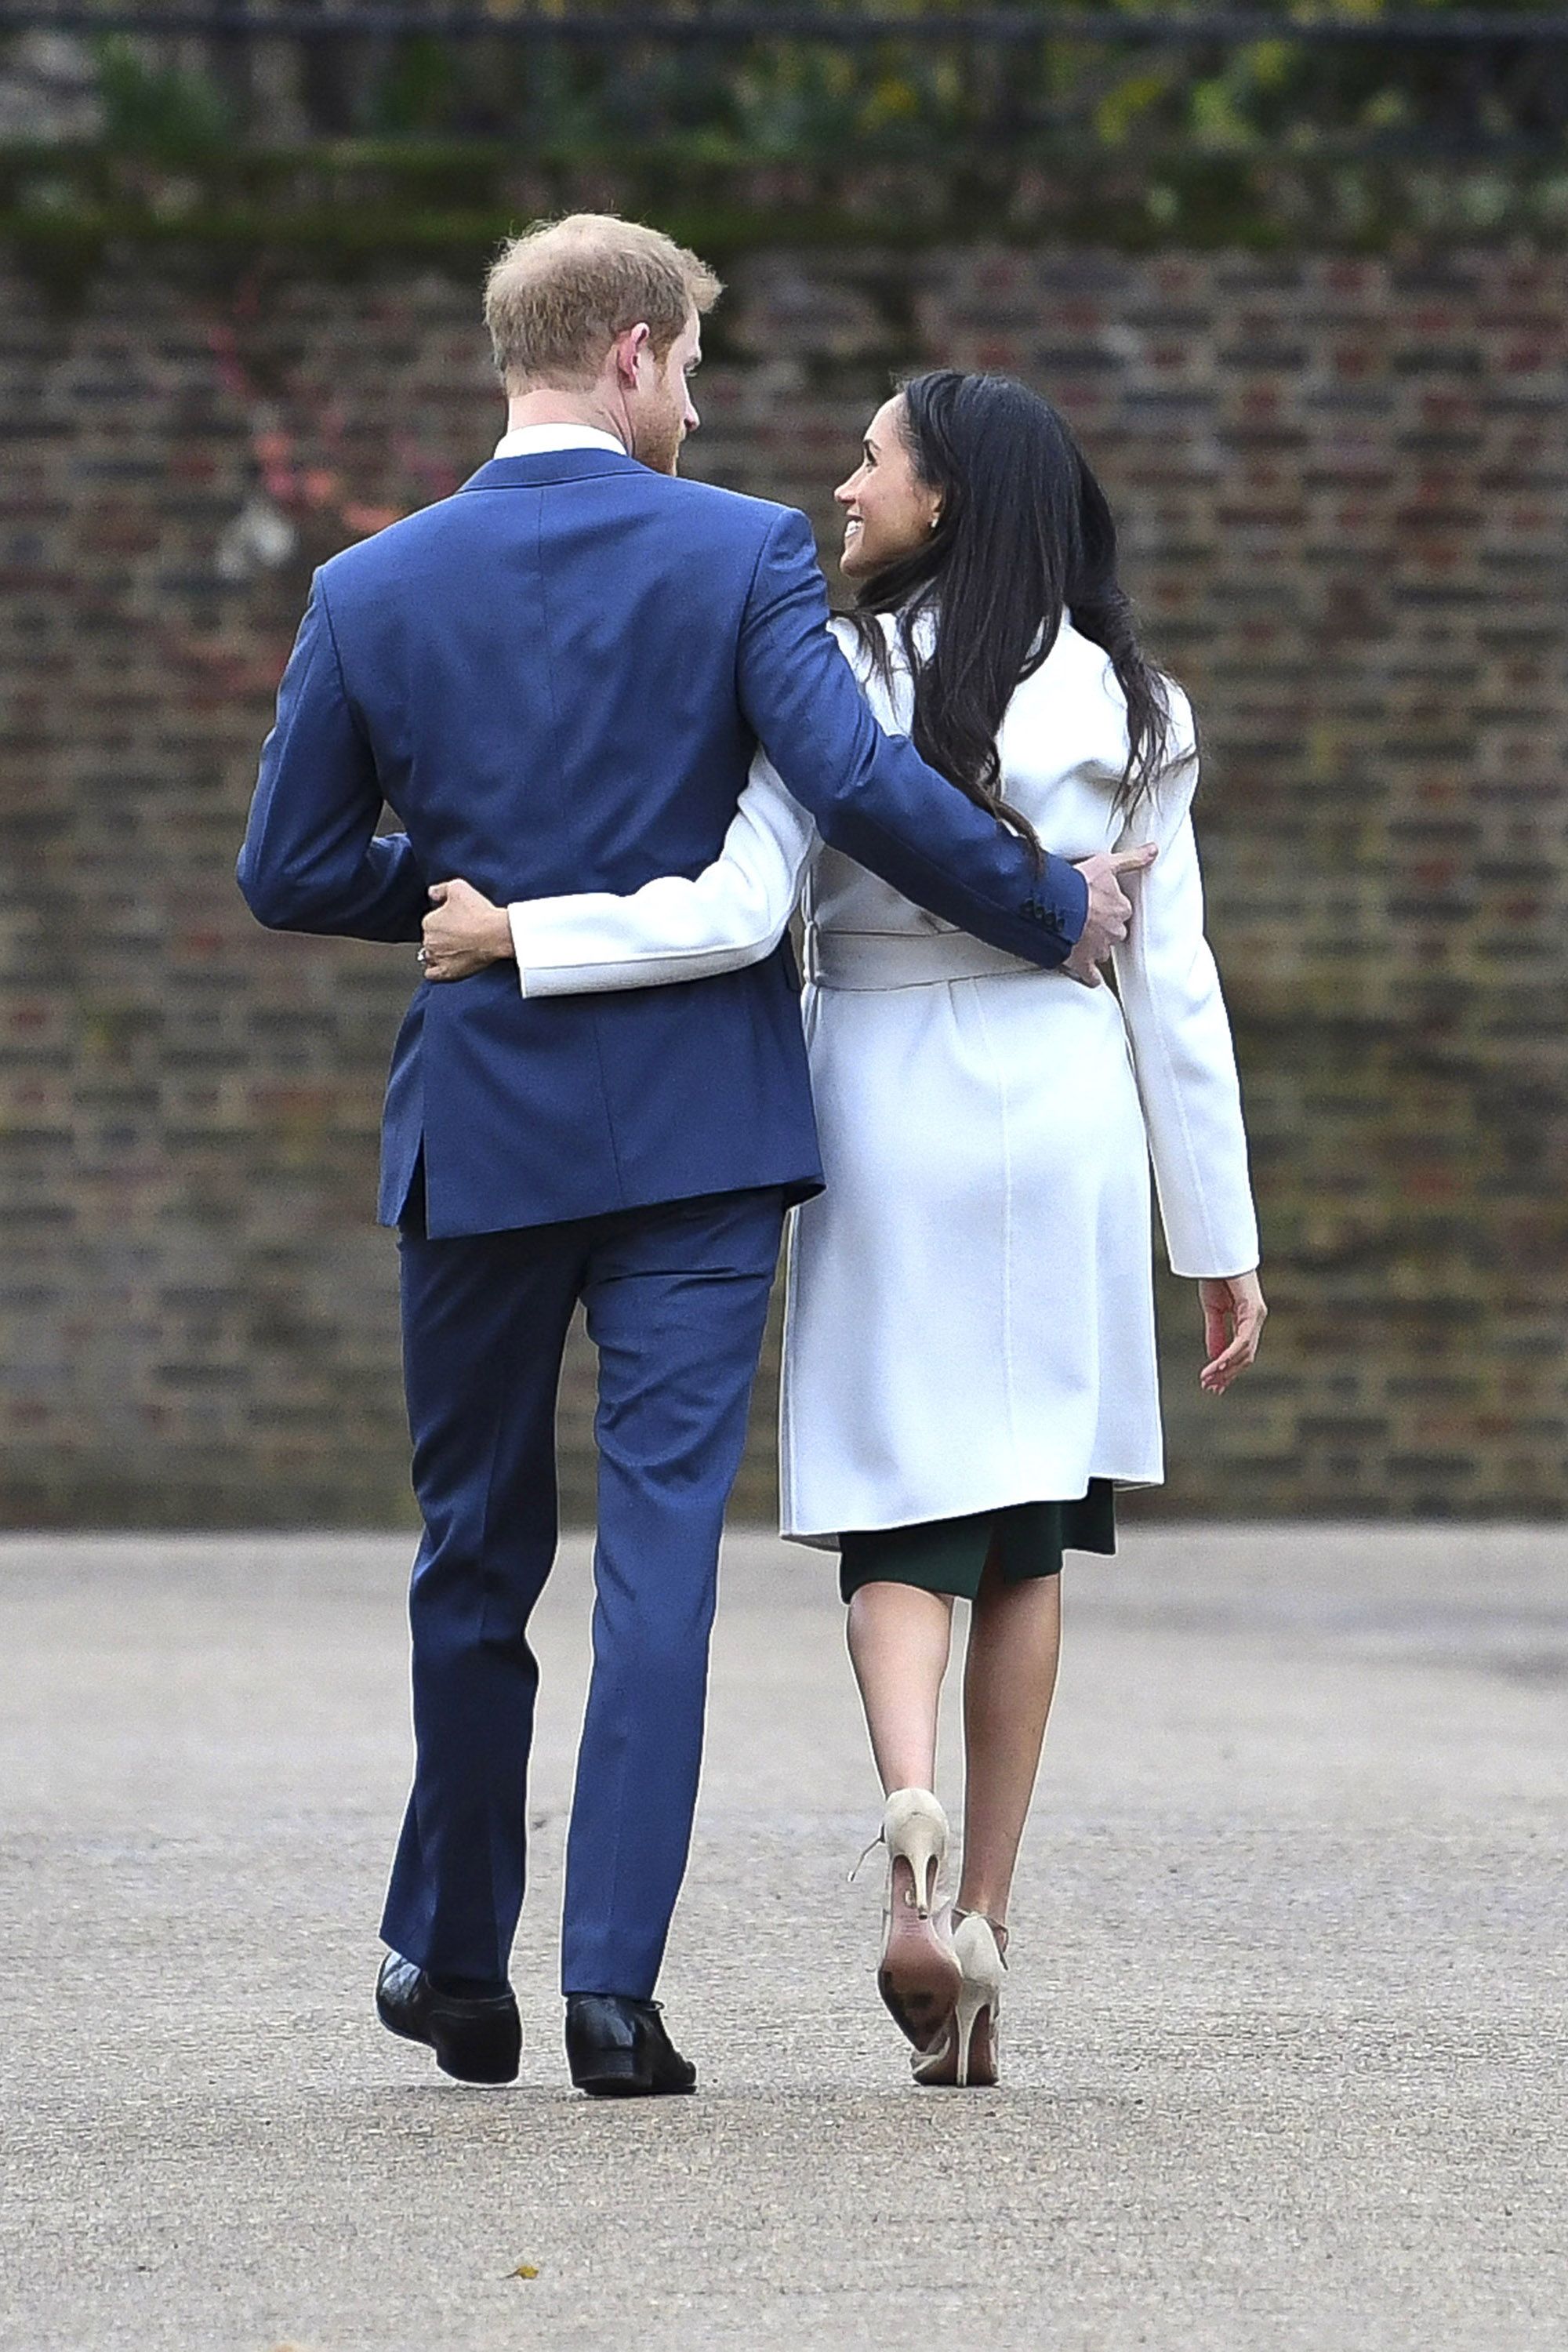 https://hips.hearstapps.com/hmg-prod.s3.amazonaws.com/images/hbz-prince-harry-meghan-markle-cute-moments-gettyimages-880231332-1523378903.jpg?crop=1xw:1xh;center,top